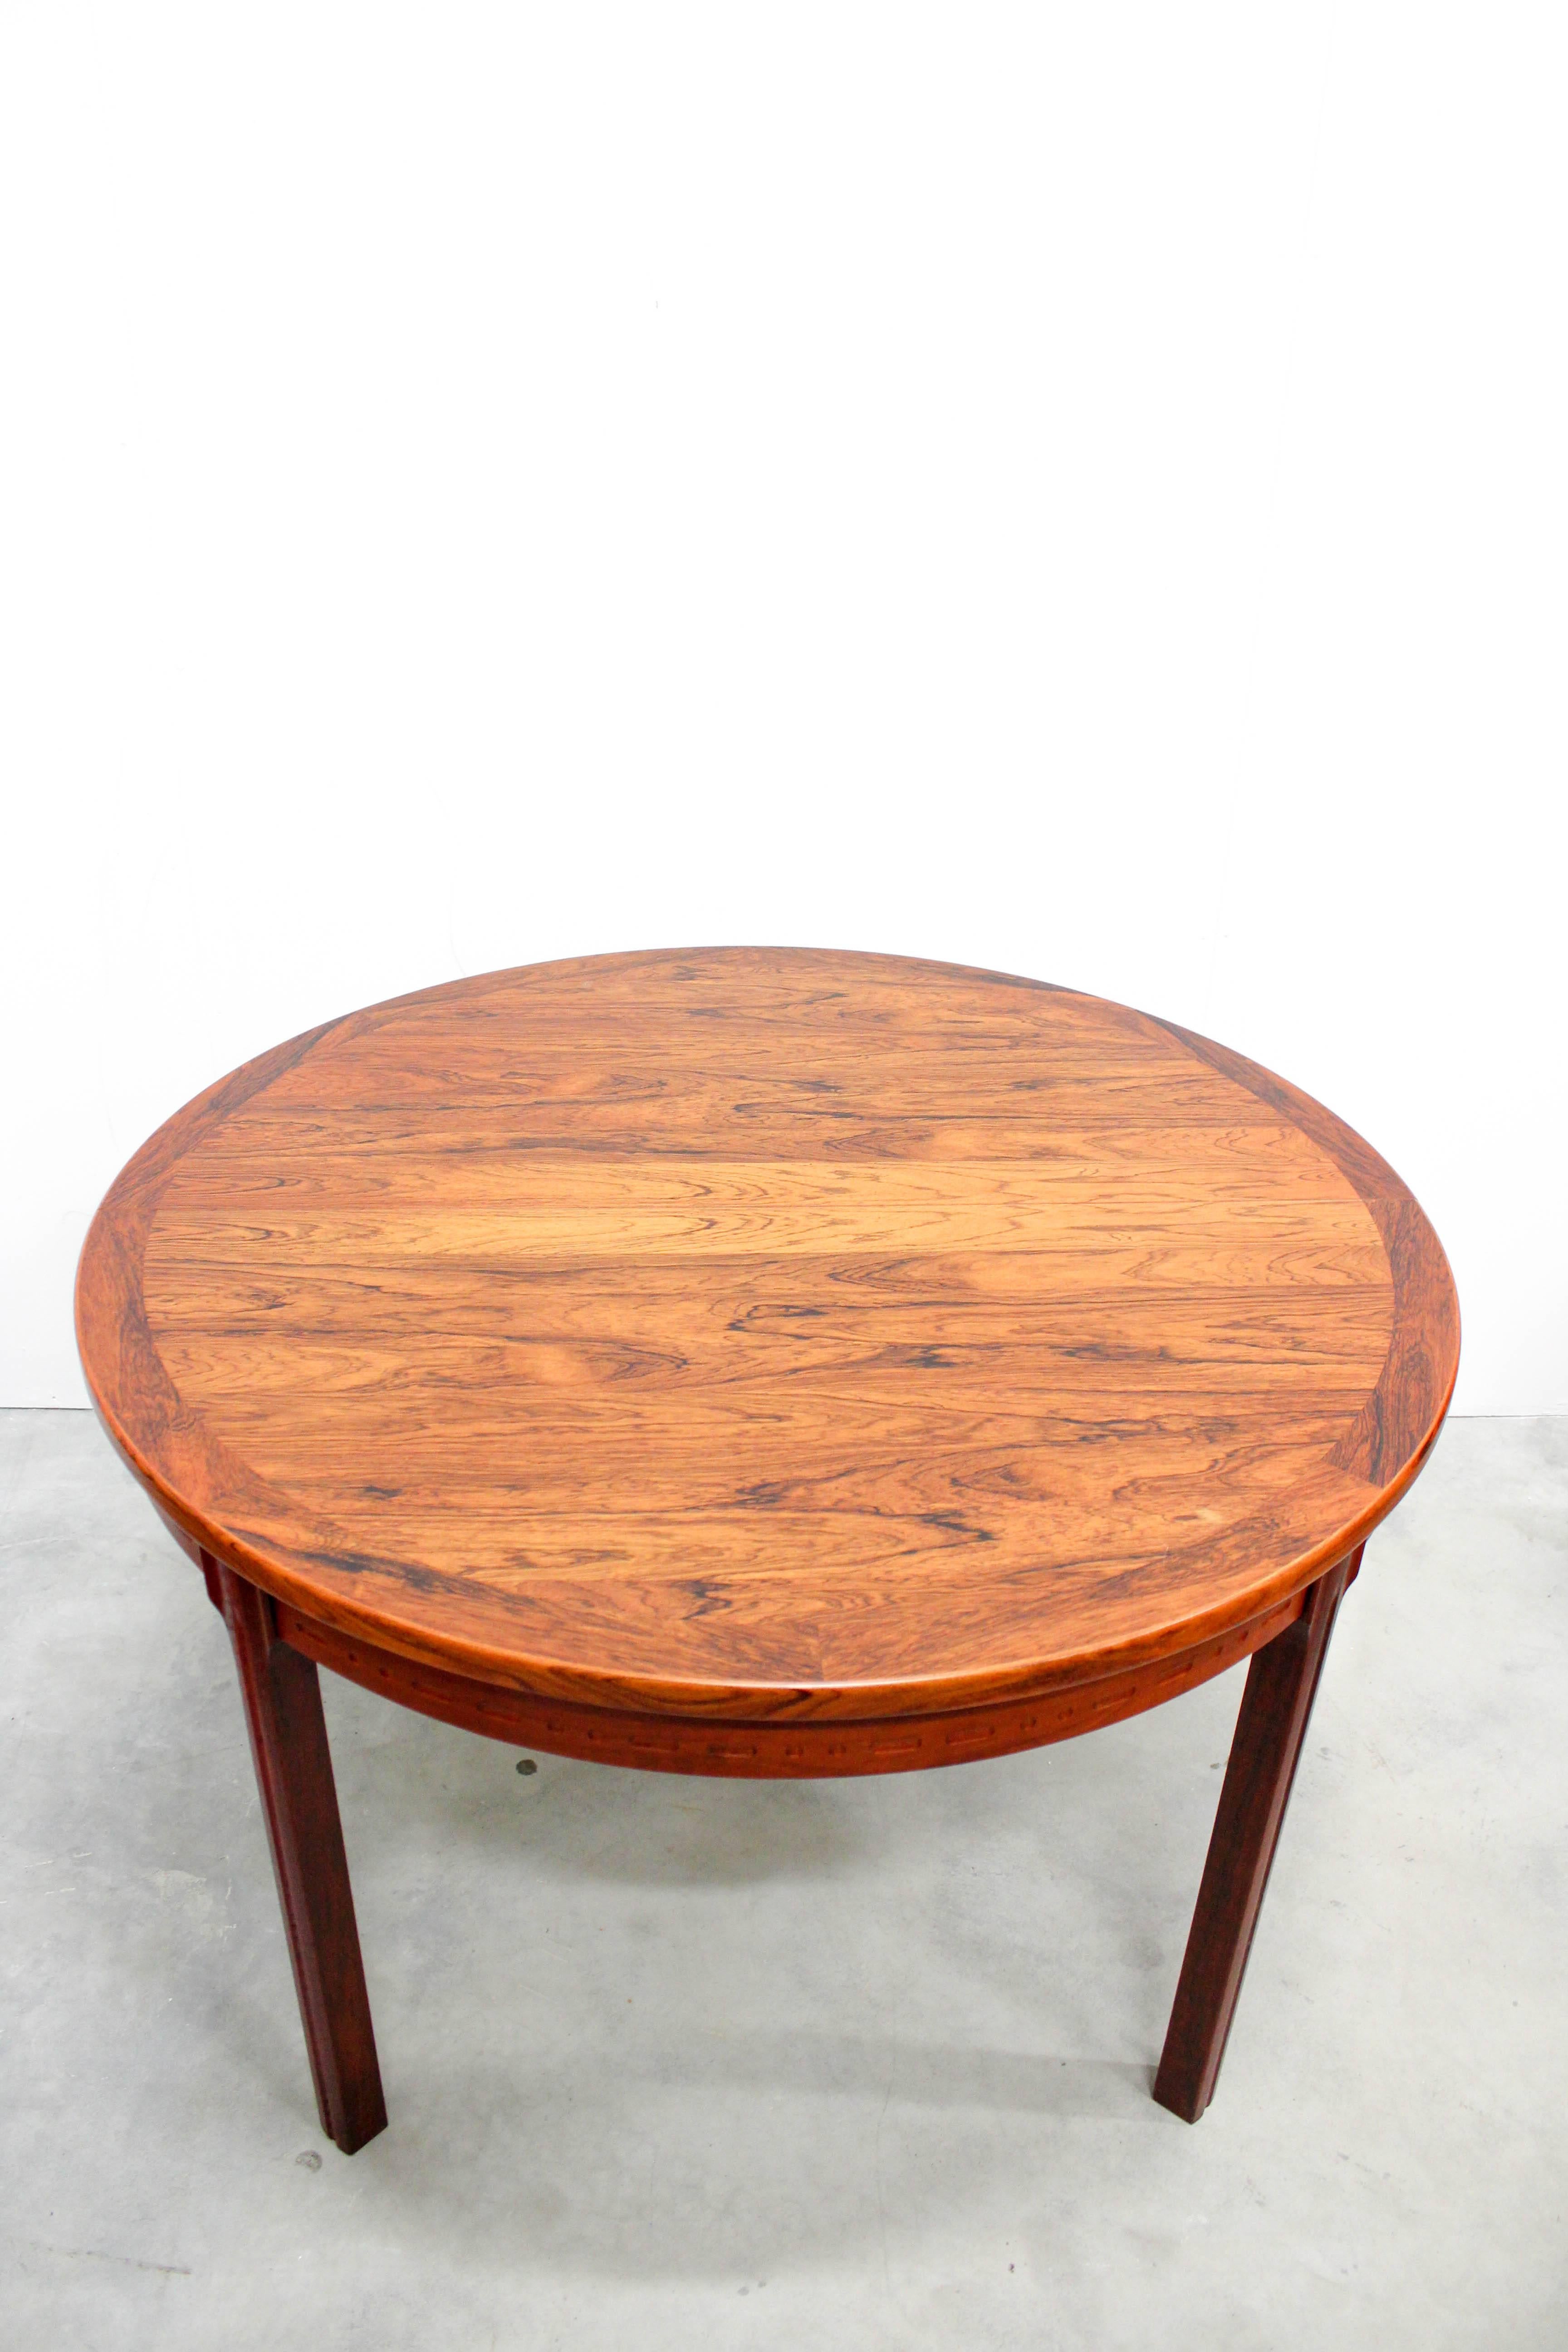 Midcentury Round Swedish Rosewood Dining Table with Two Leafs In Good Condition For Sale In Malmo, SE